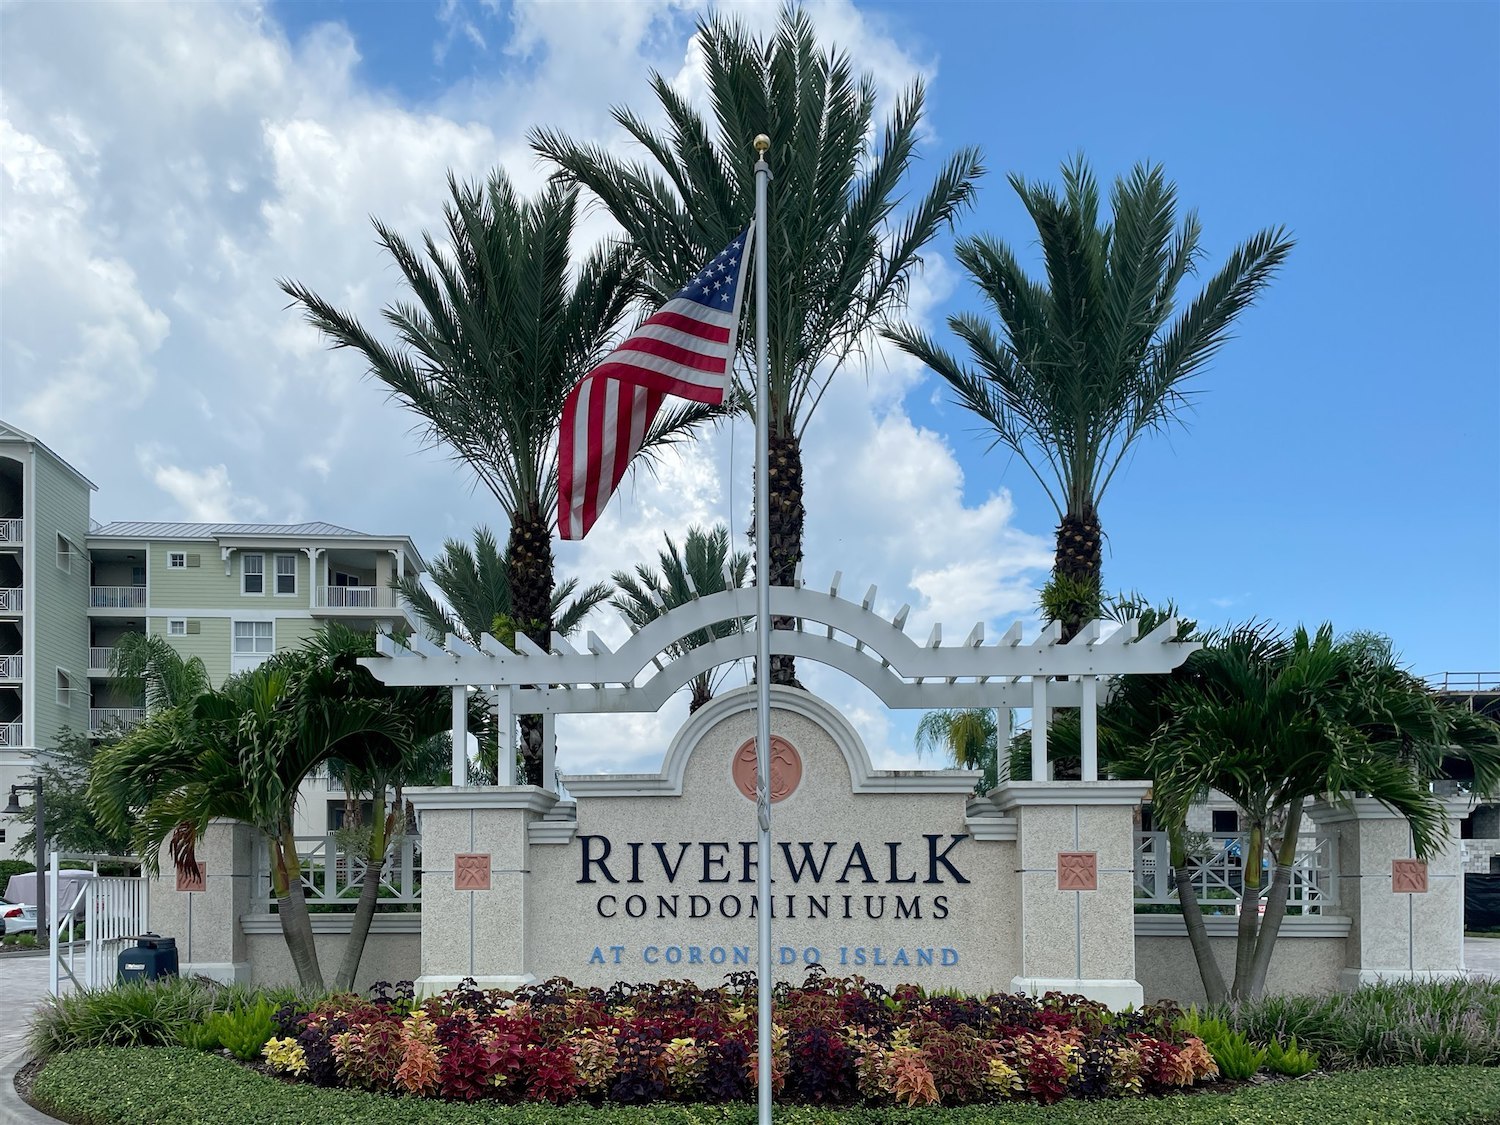 Escape to waterfront luxury at the new Riverwalk condo community.